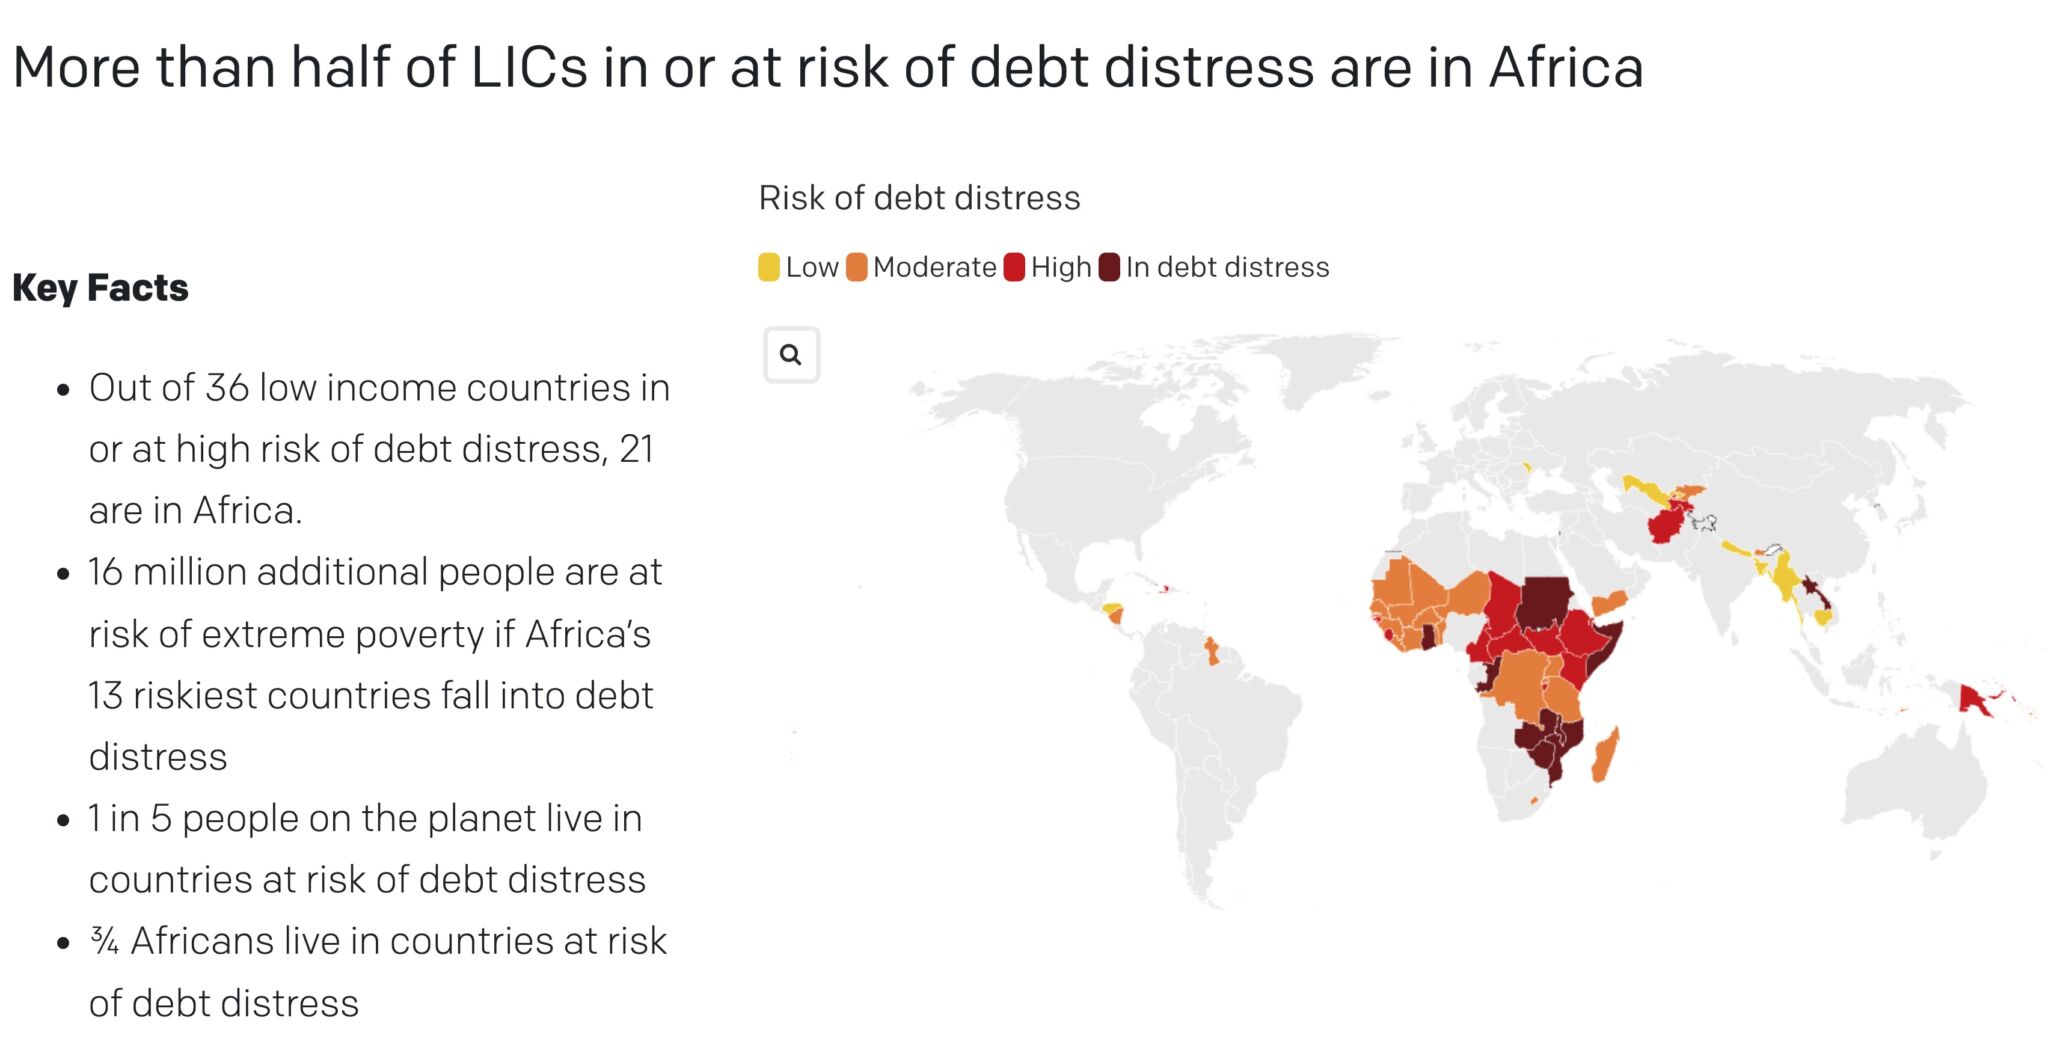 Image of the world map showing the countries at risk or in debt distress